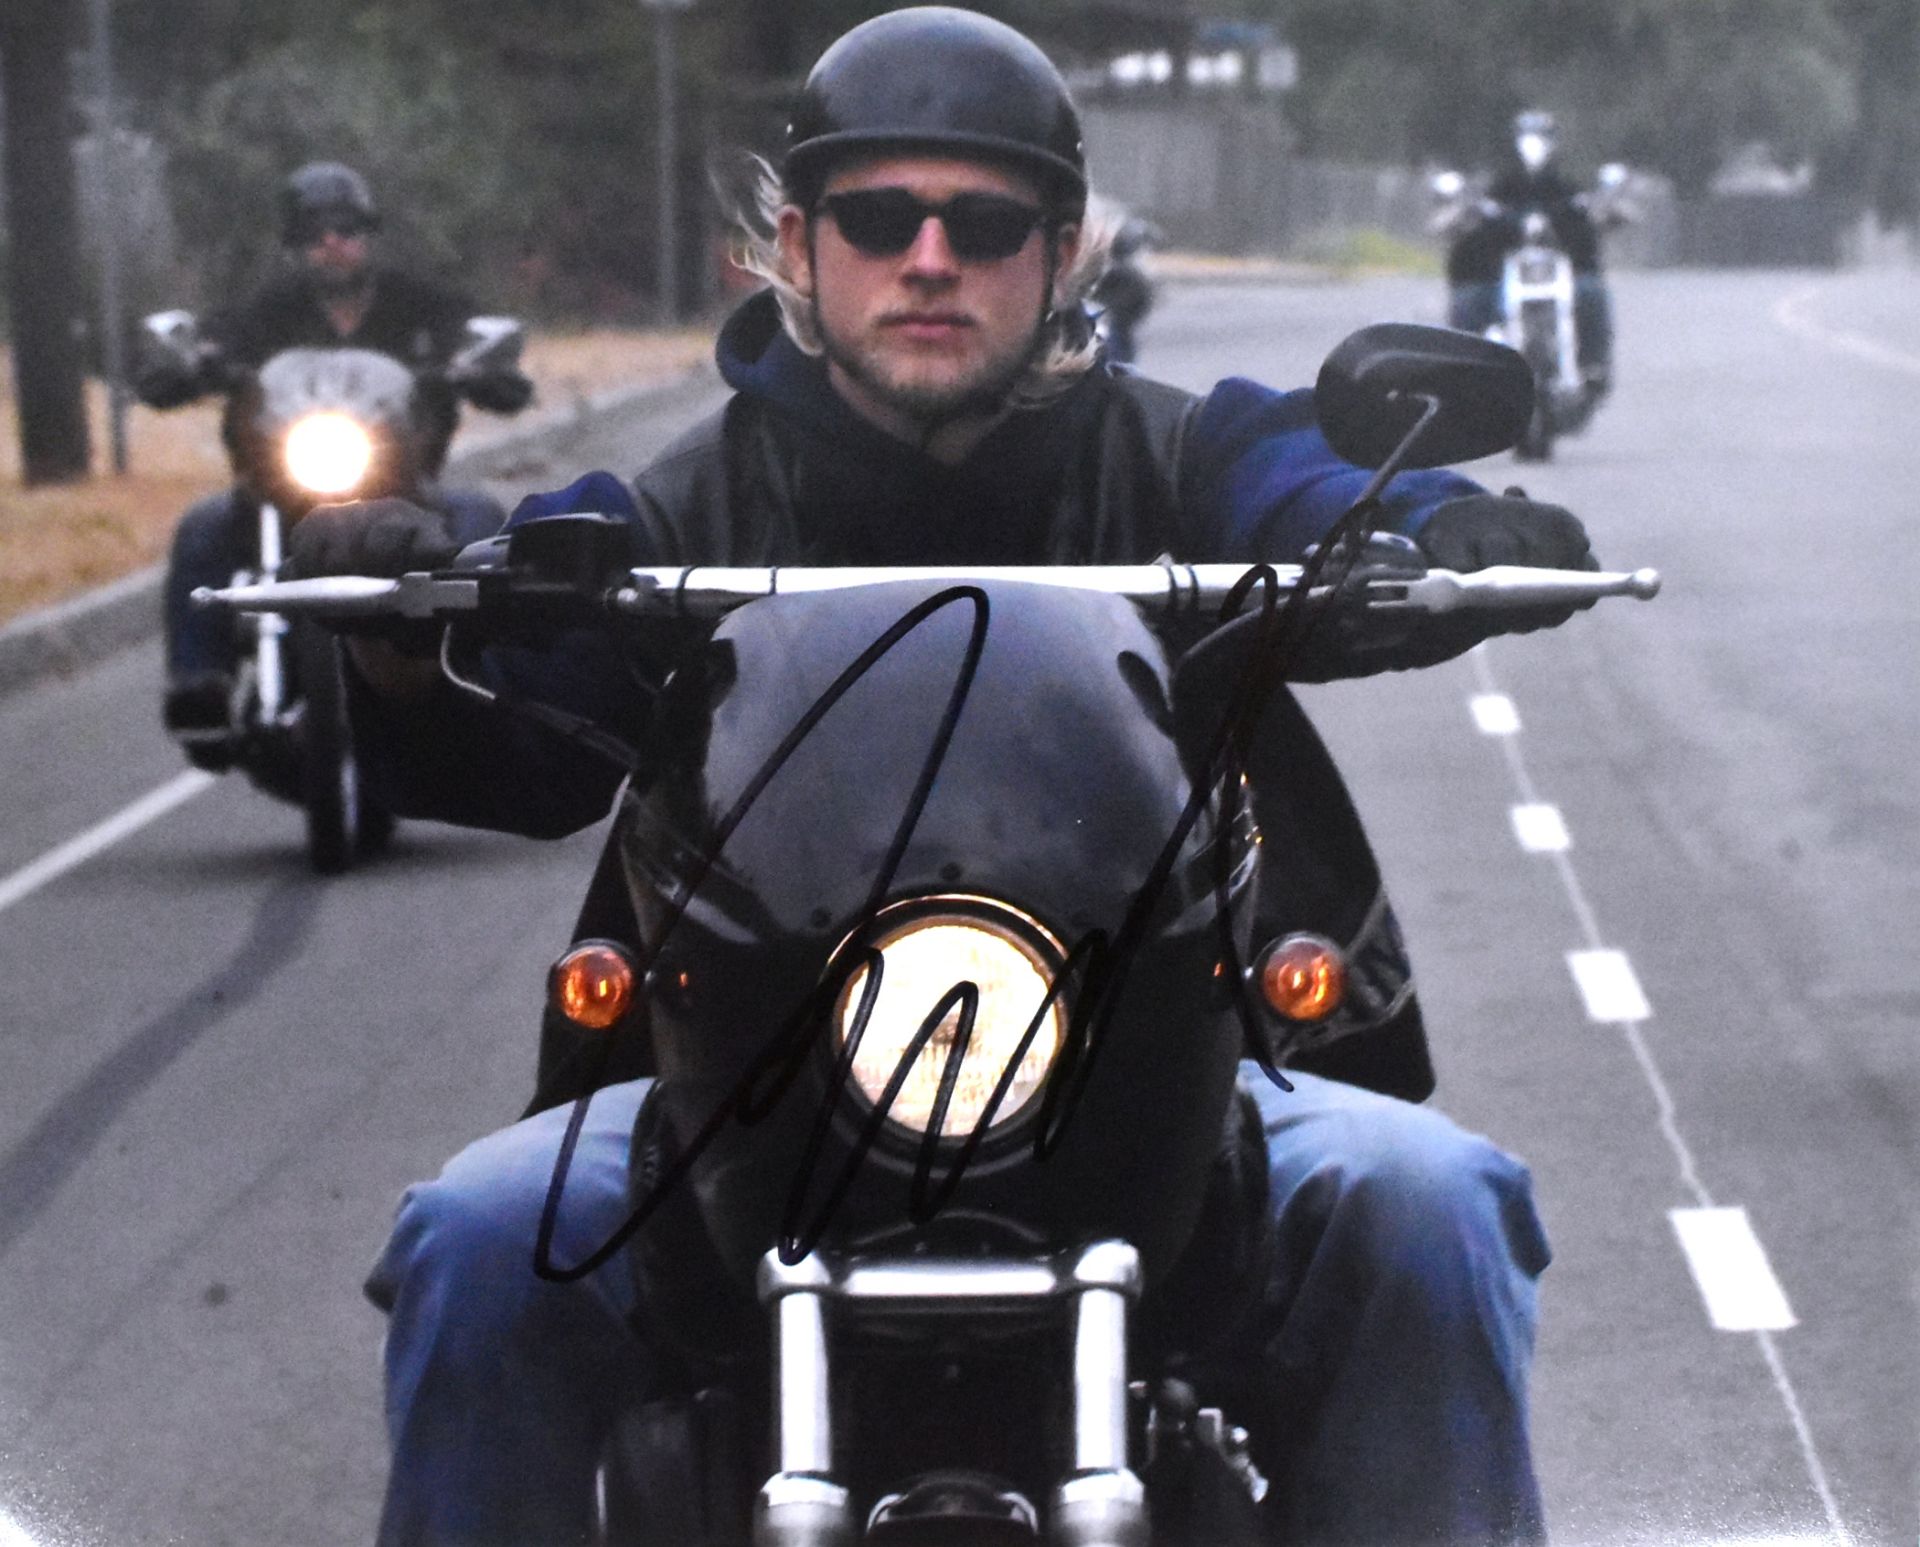 CHARLIE HUNNAM - SONS OF ANARCHY - SIGNED 8X10" - ACOA